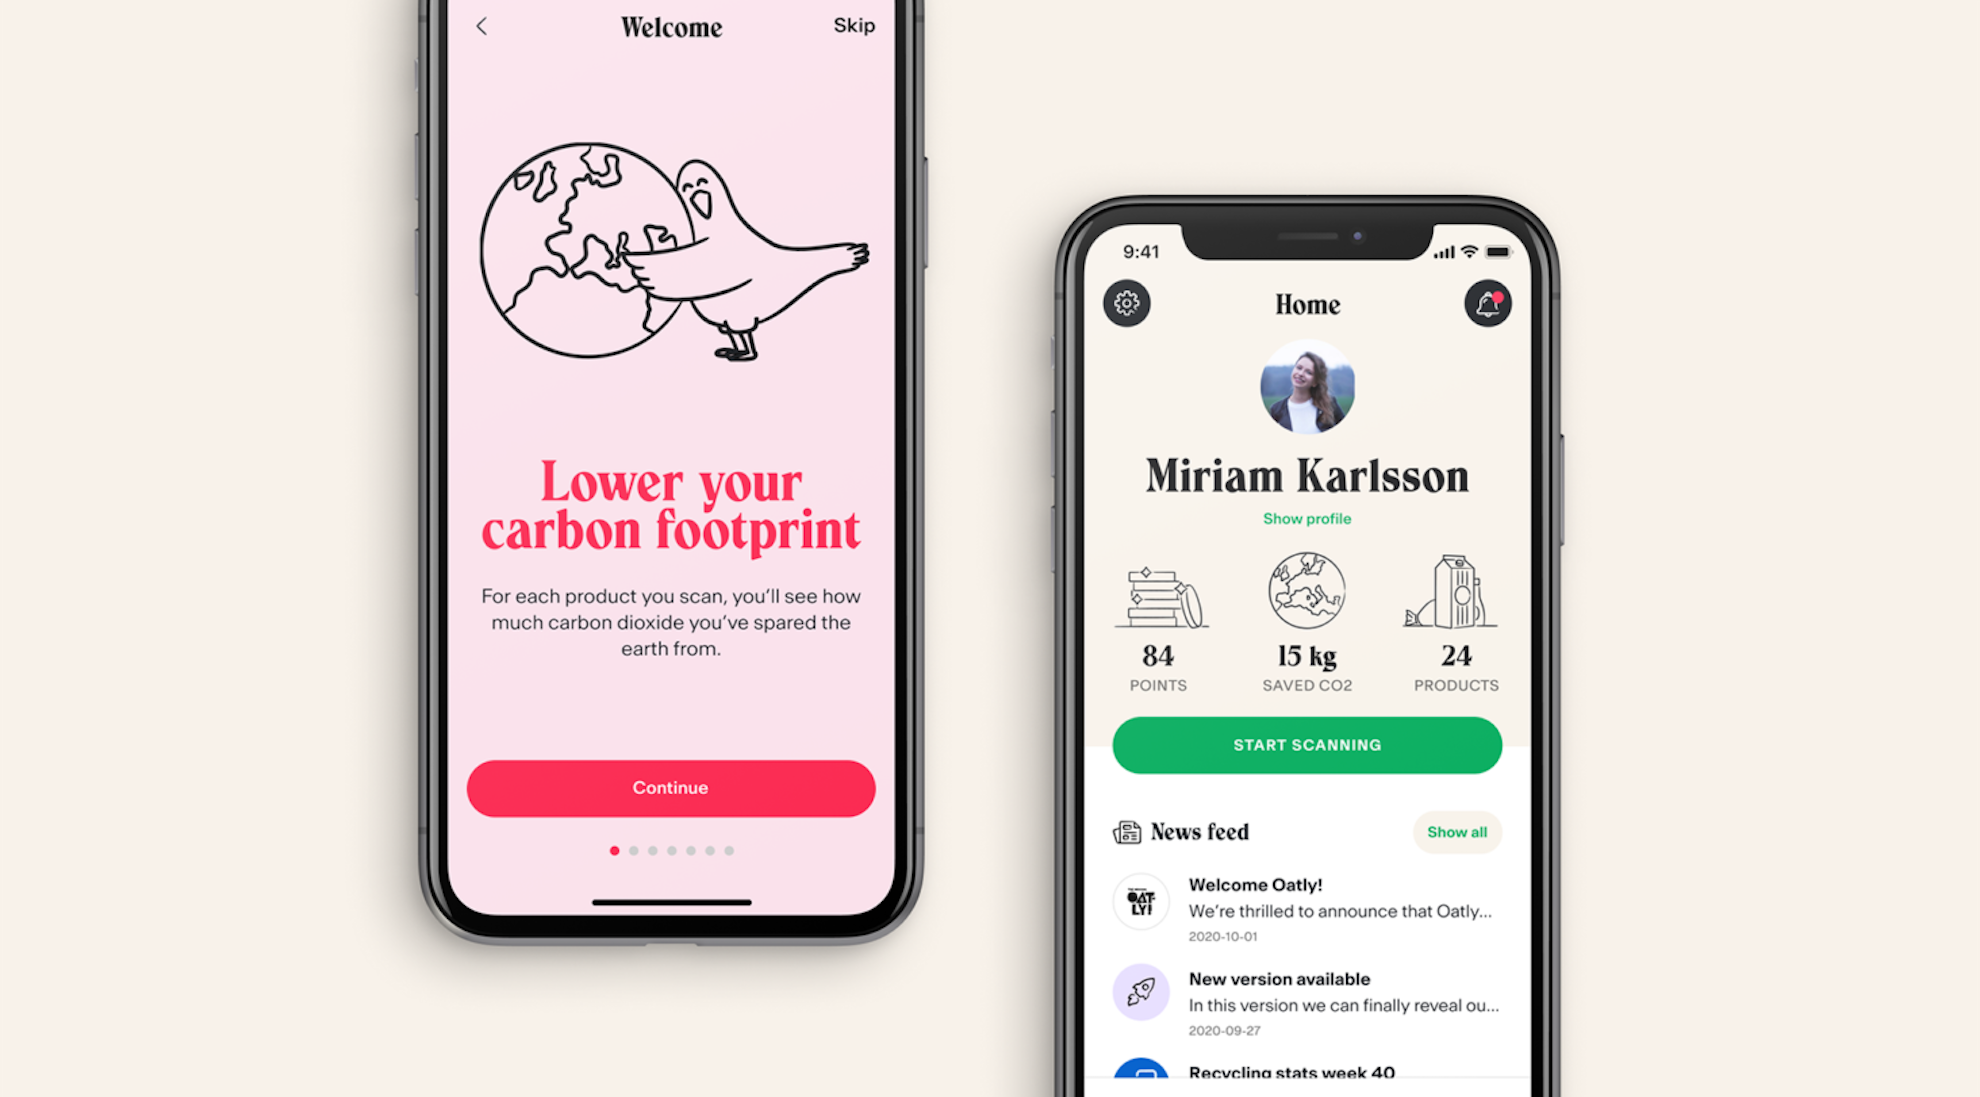 beige background with two iphone screens, the left screen shows the 'welcome' page of the Bower app with the words "Lower your carbon footprint" and the right screen shows a prospective account page with the name "Miriam Karlsson"